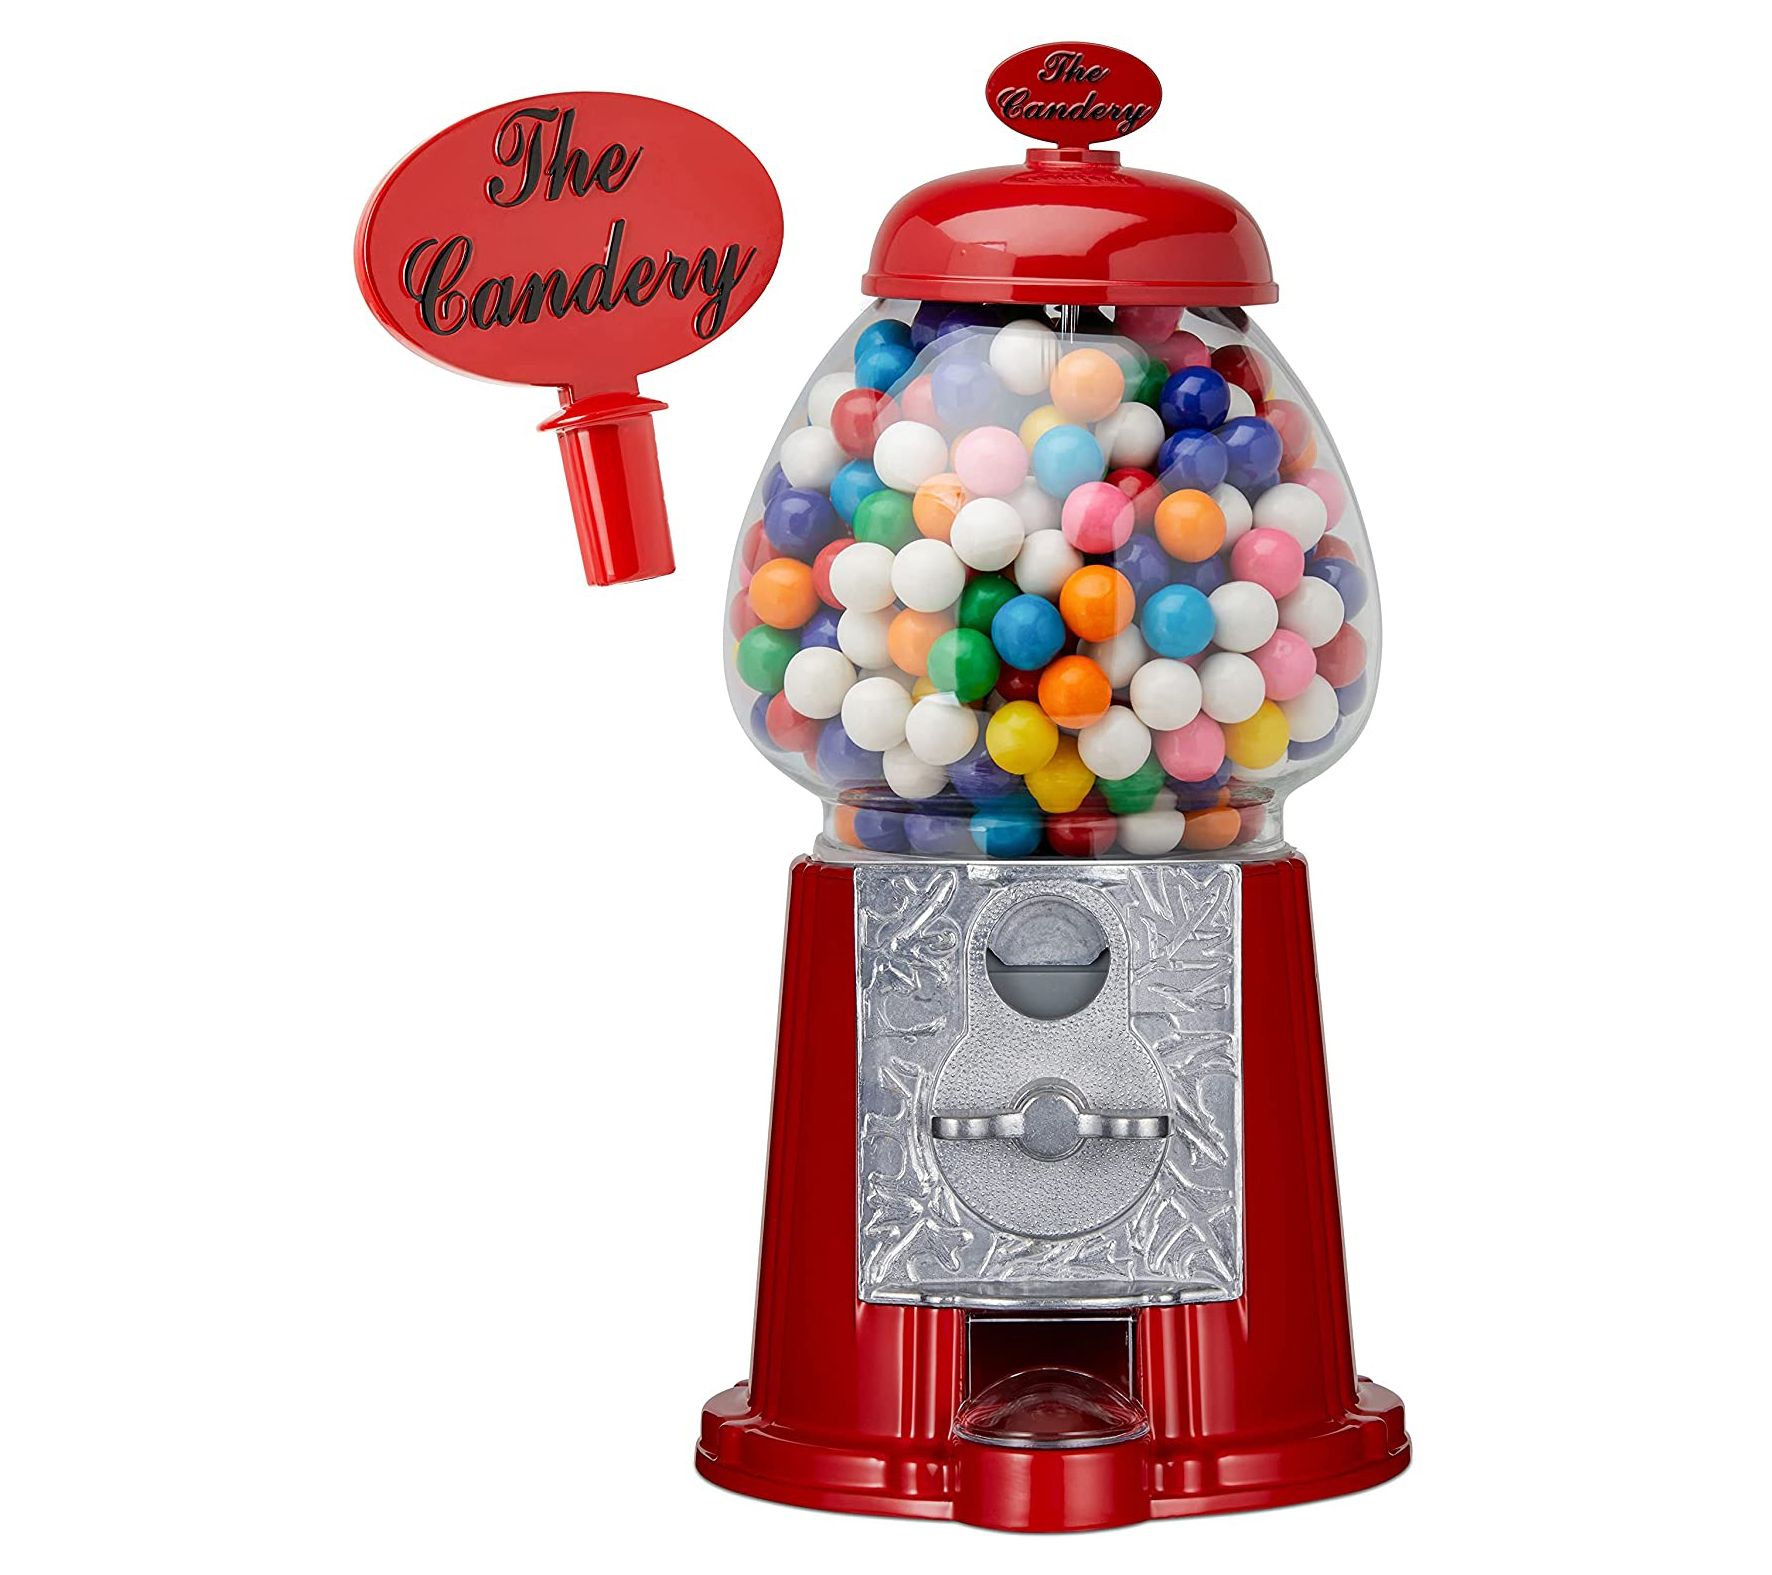 Great Northern 11 Junior Vintage Old Fashioned Candy Gumball Machine Bank  Toy - Everyone Loves Gumballs!